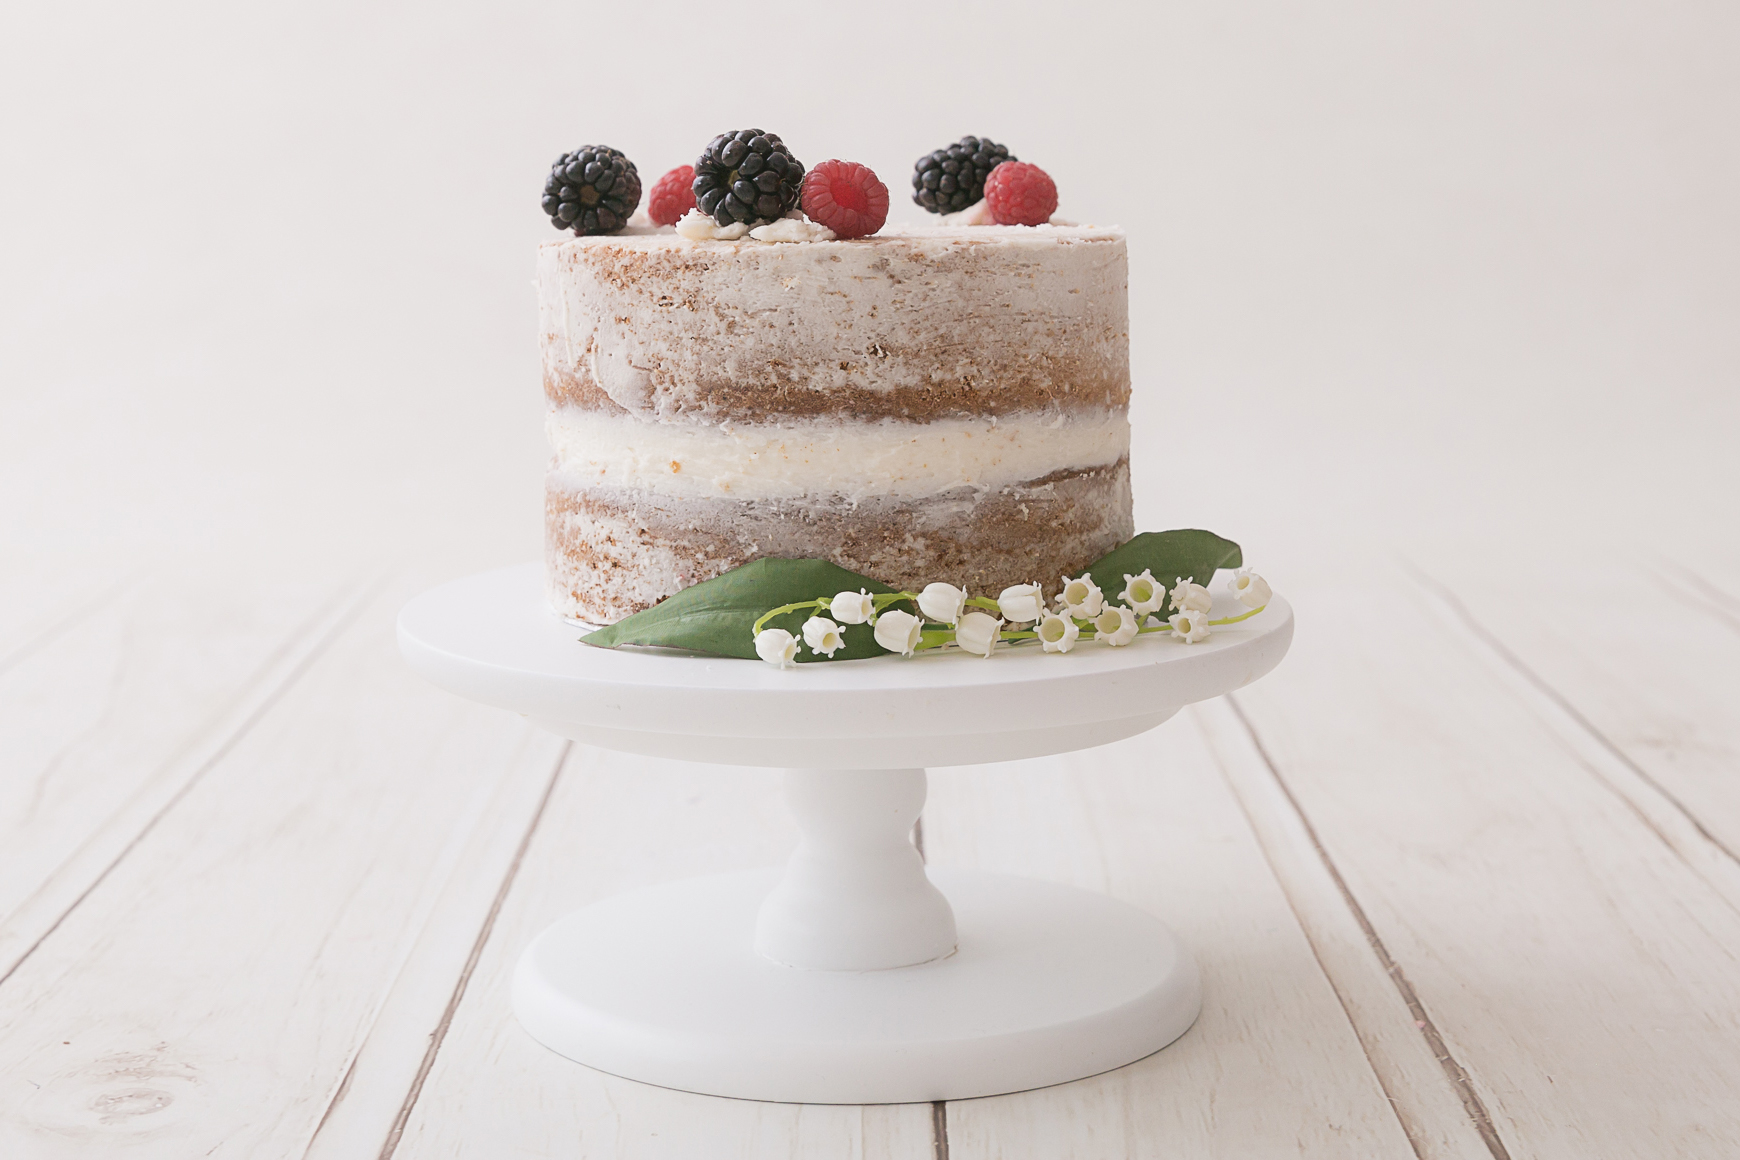 naked cake with berries